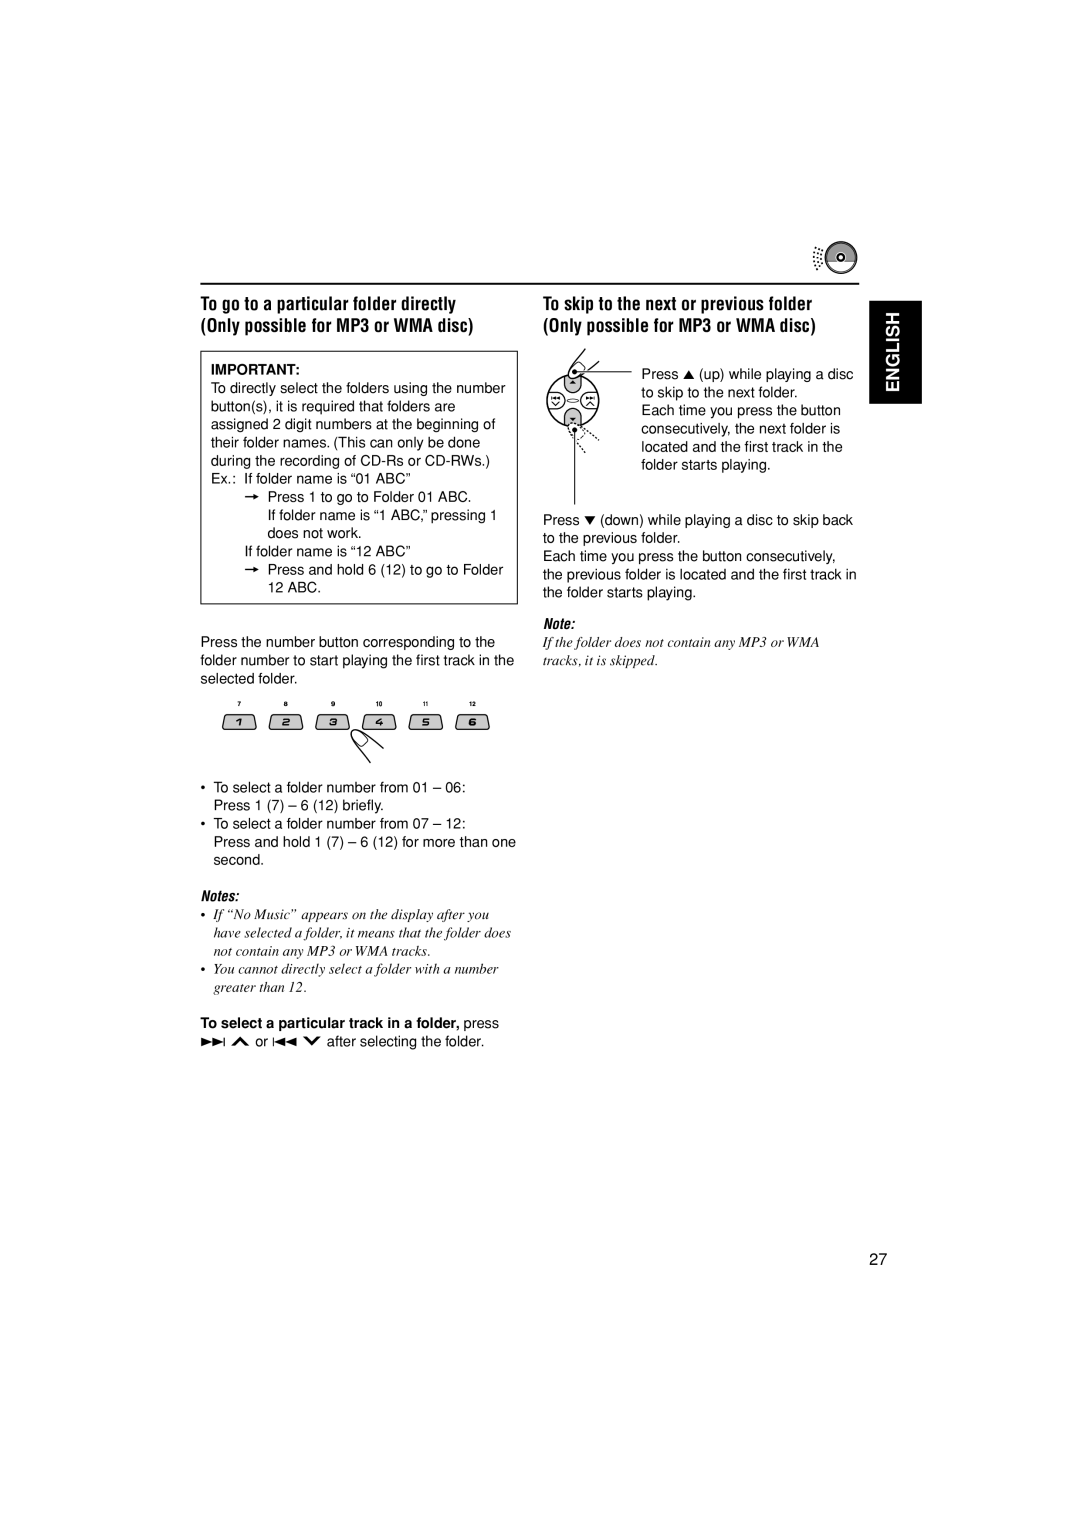 JVC KD-LH401 service manual English, You cannot directly select a folder with a number greater than 